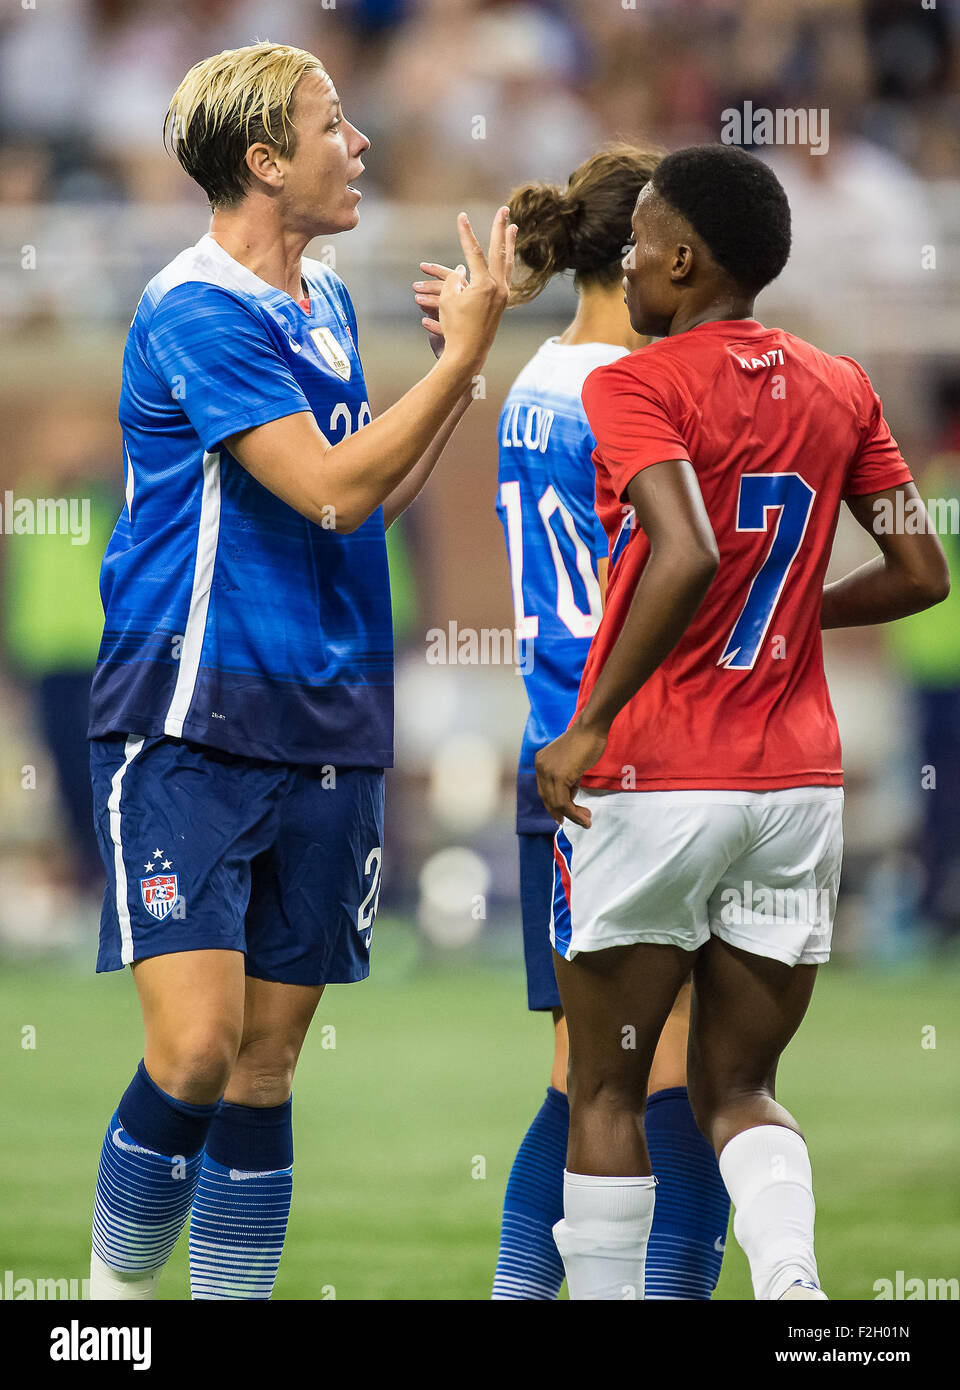 Detroit, Michigan, USA. 17th Sep, 2015. USA's Abby Wambach (20) gives her team direction during the International Friendly Soccer Match between the United States Women's National Team and the Haitian Women's National Team at Ford Field in Detroit, Michigan. USA won the match 5-0. Credit:  Scott Hasse/ZUMA Wire/Alamy Live News Stock Photo